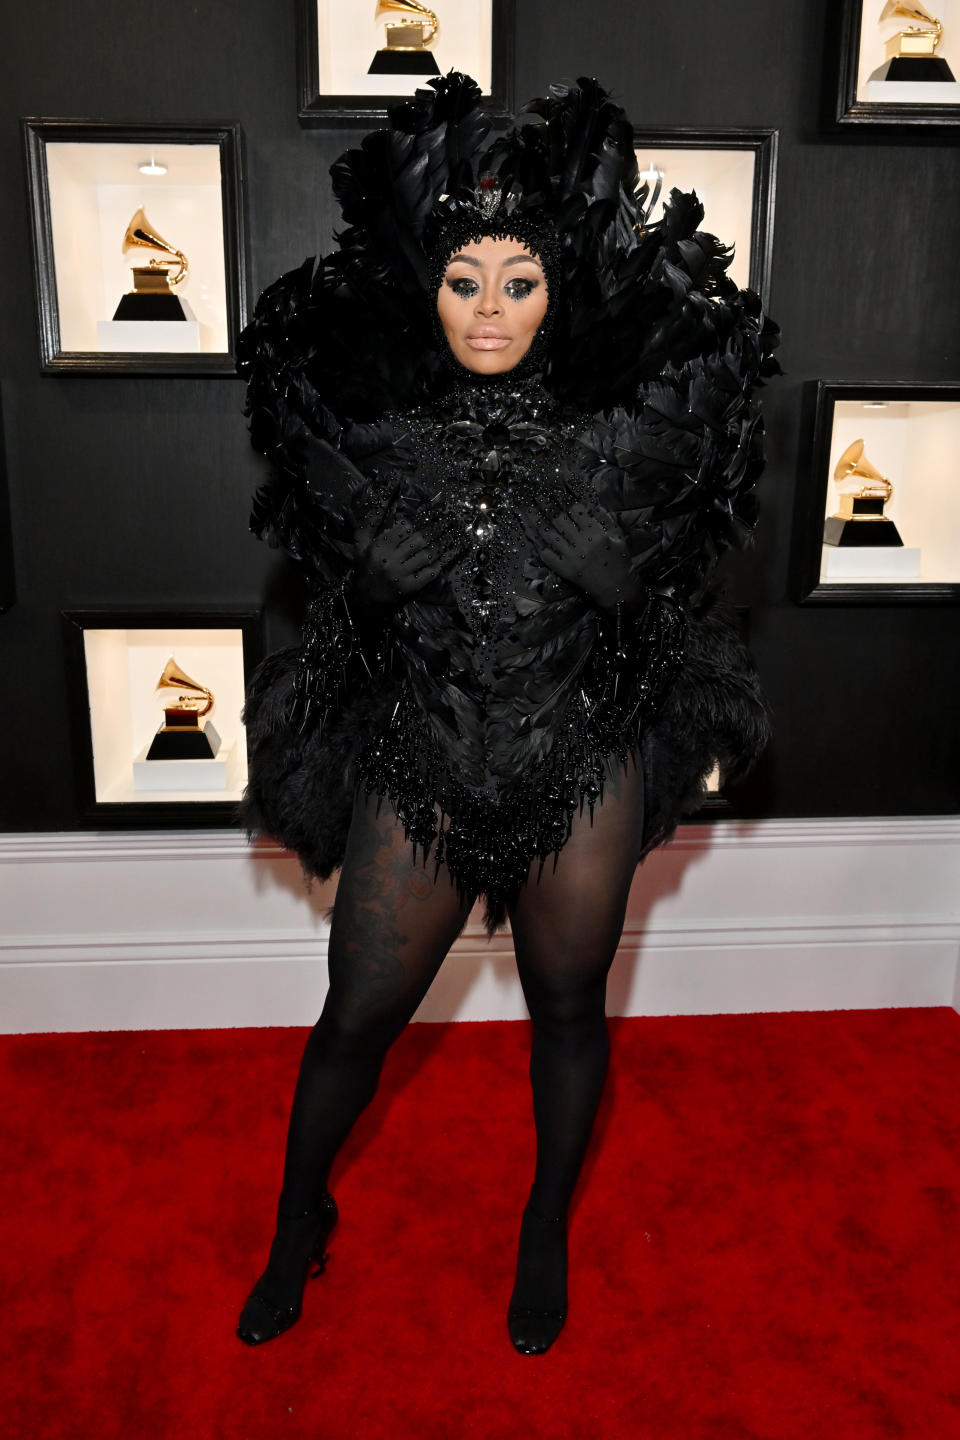 LOS ANGELES, CALIFORNIA - FEBRUARY 05: Blac Chyna attends the 65th GRAMMY Awards on February 05, 2023 in Los Angeles, California. (Photo by Lester Cohen/Getty Images for The Recording Academy)